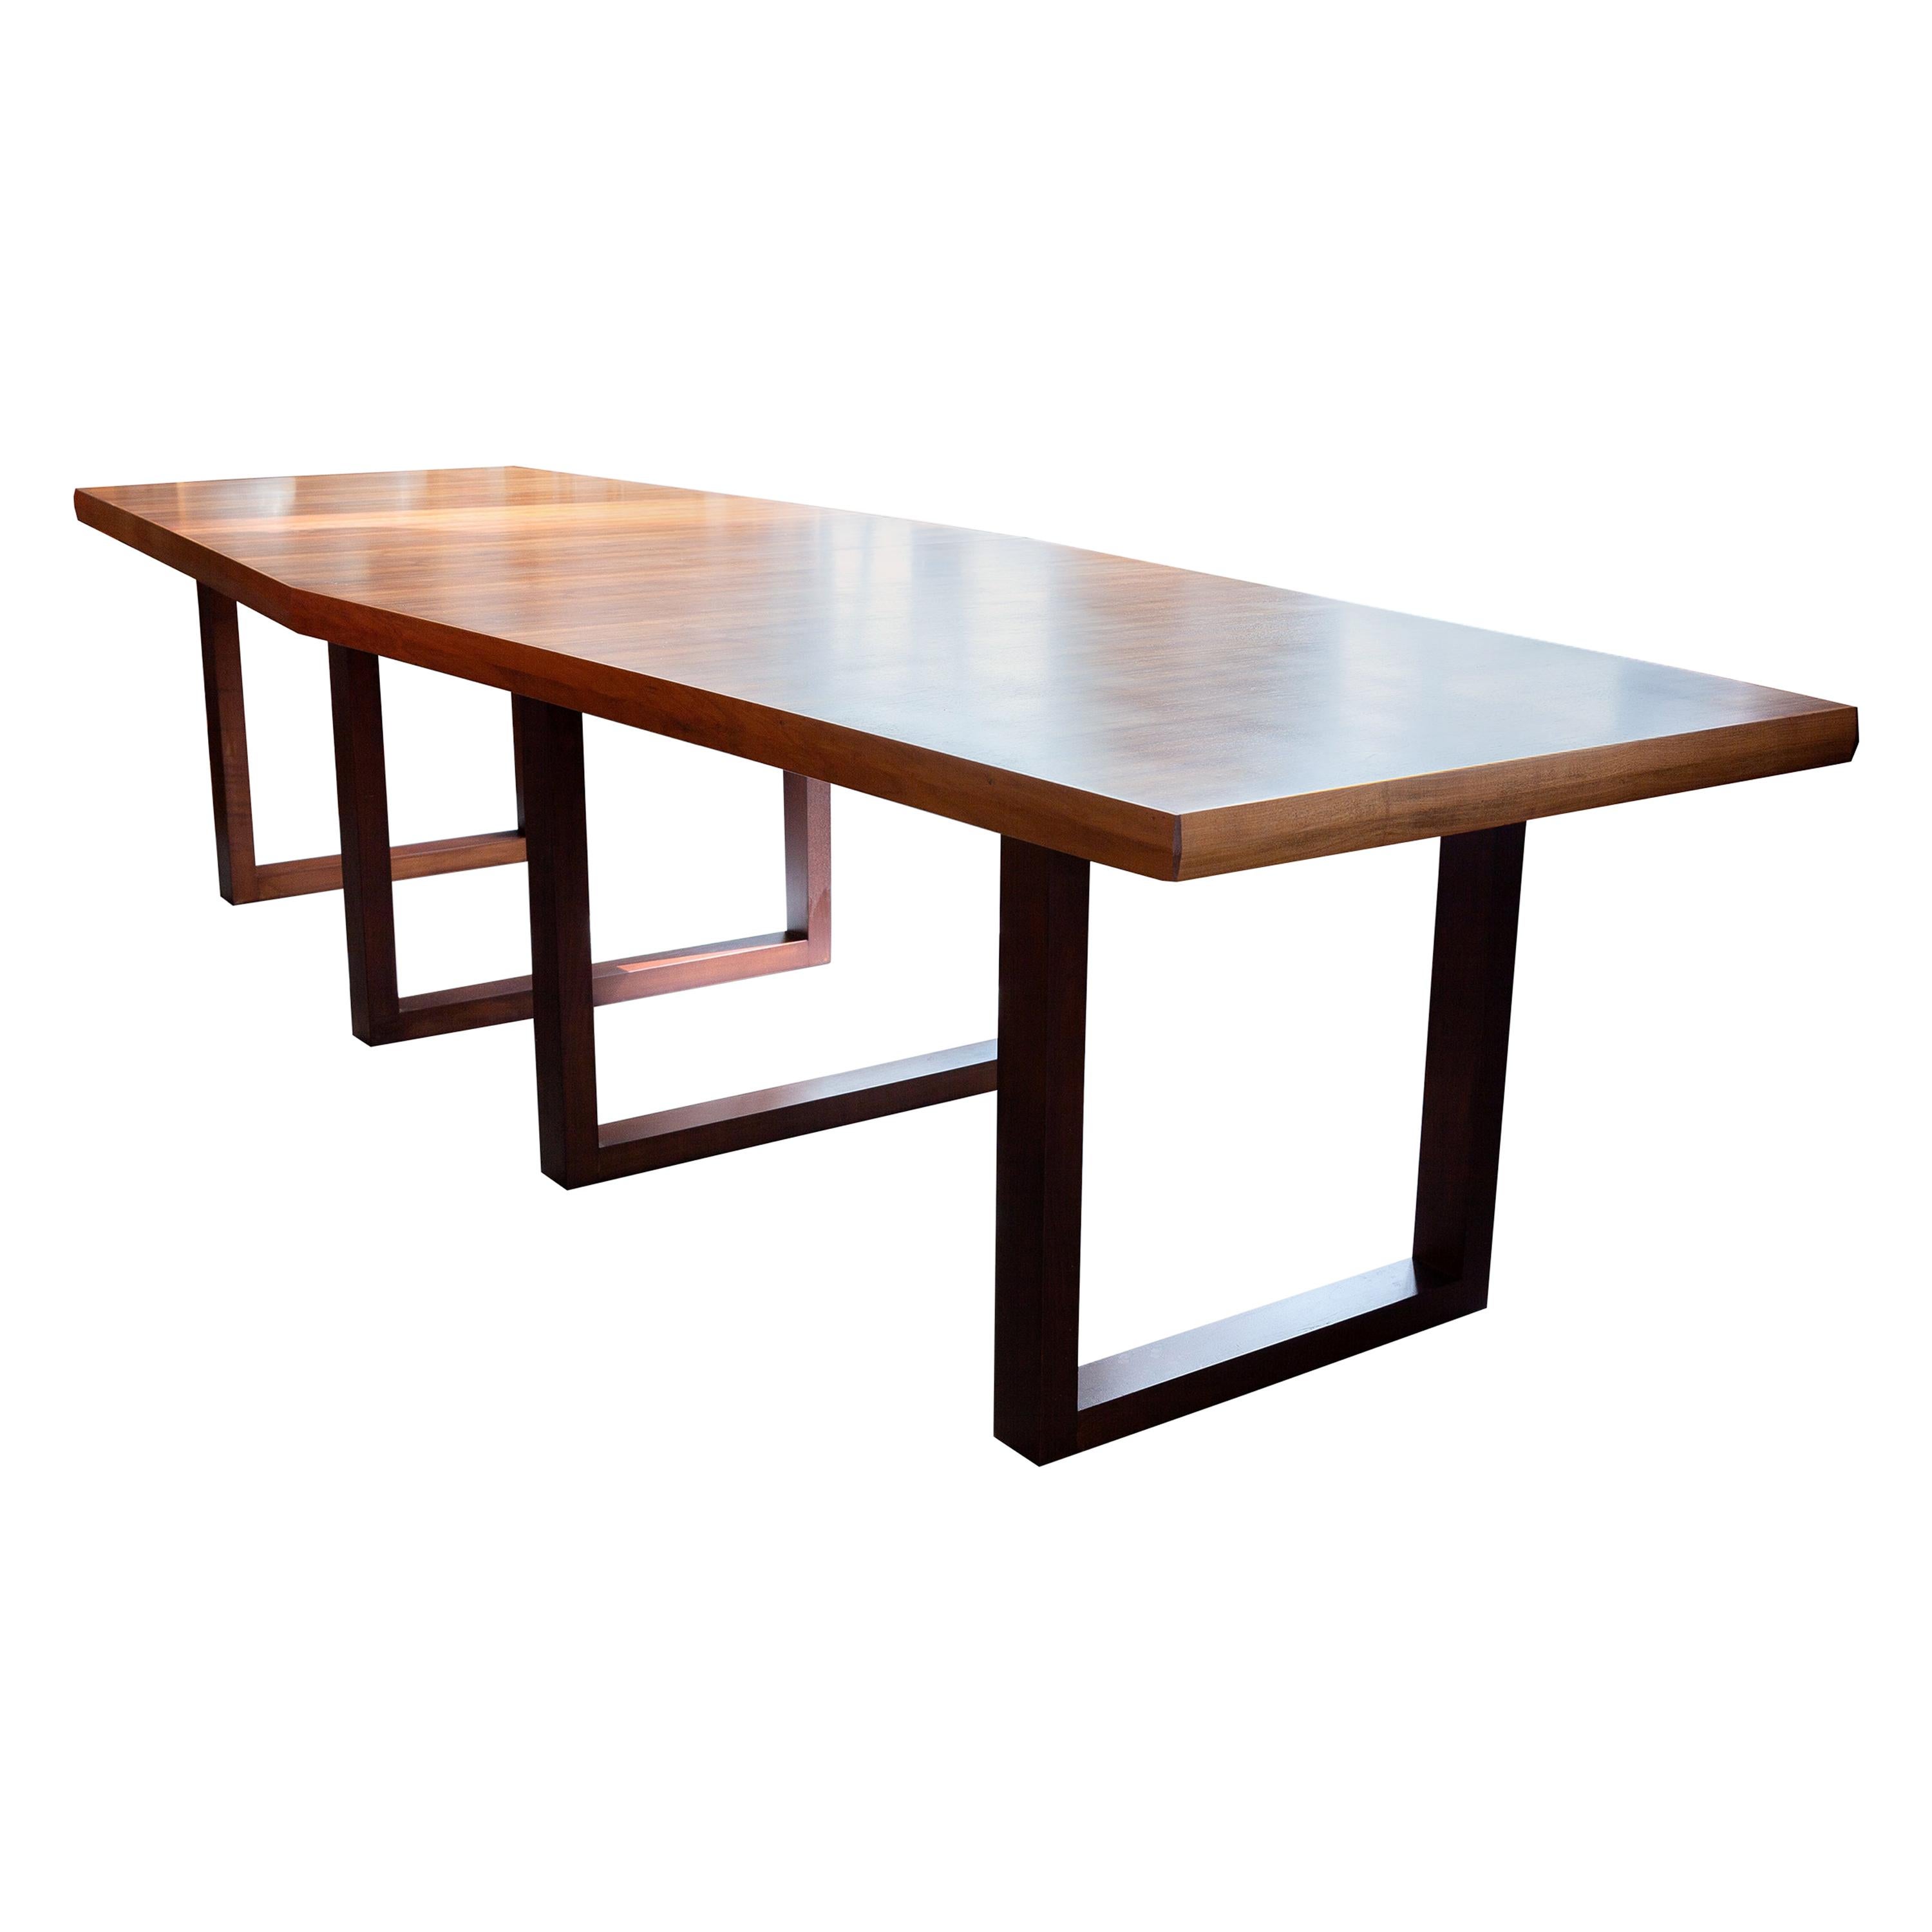 Large Modern Boat Shape Conference, Dining Table designed by De Coene Belgium